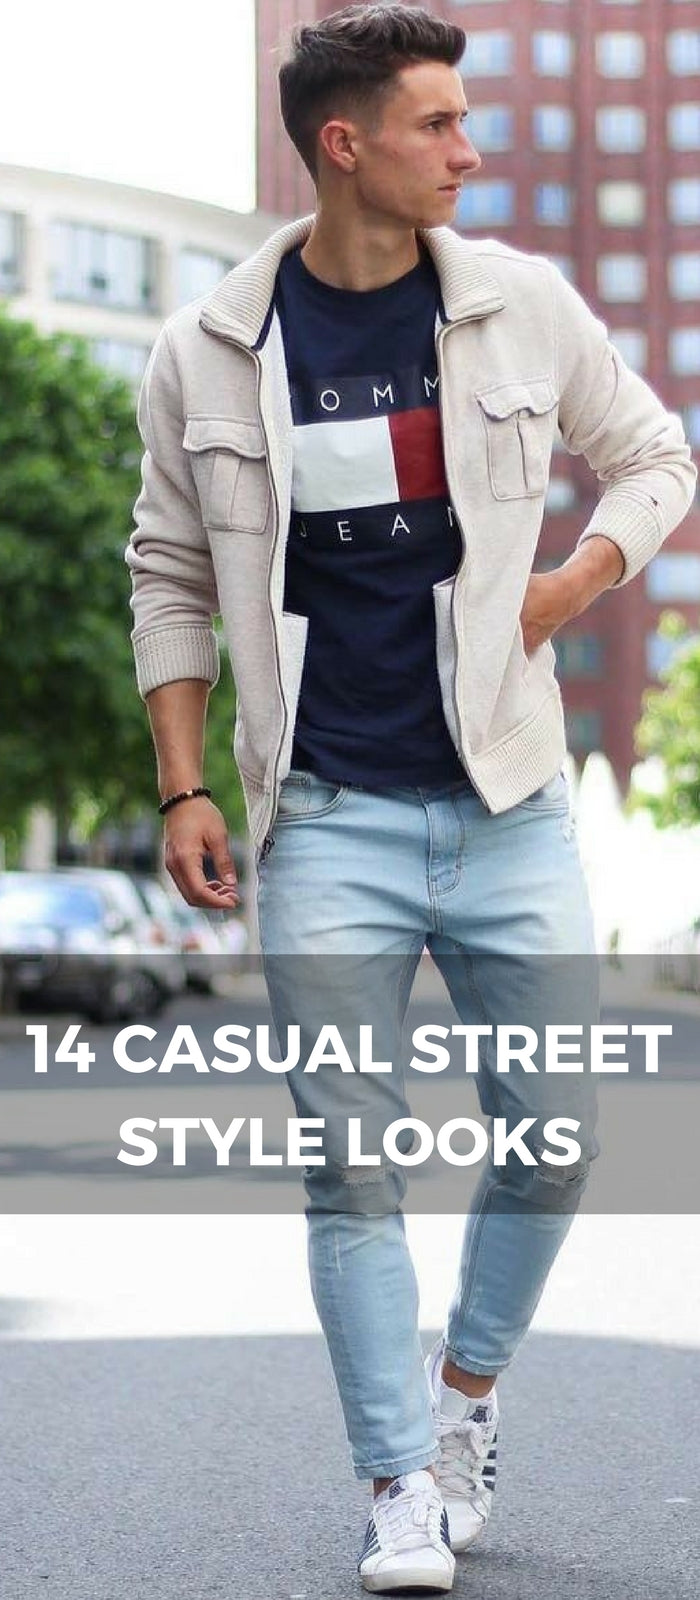 Gunna Outfit  Street style outfits men, Street style outfit, Outfits